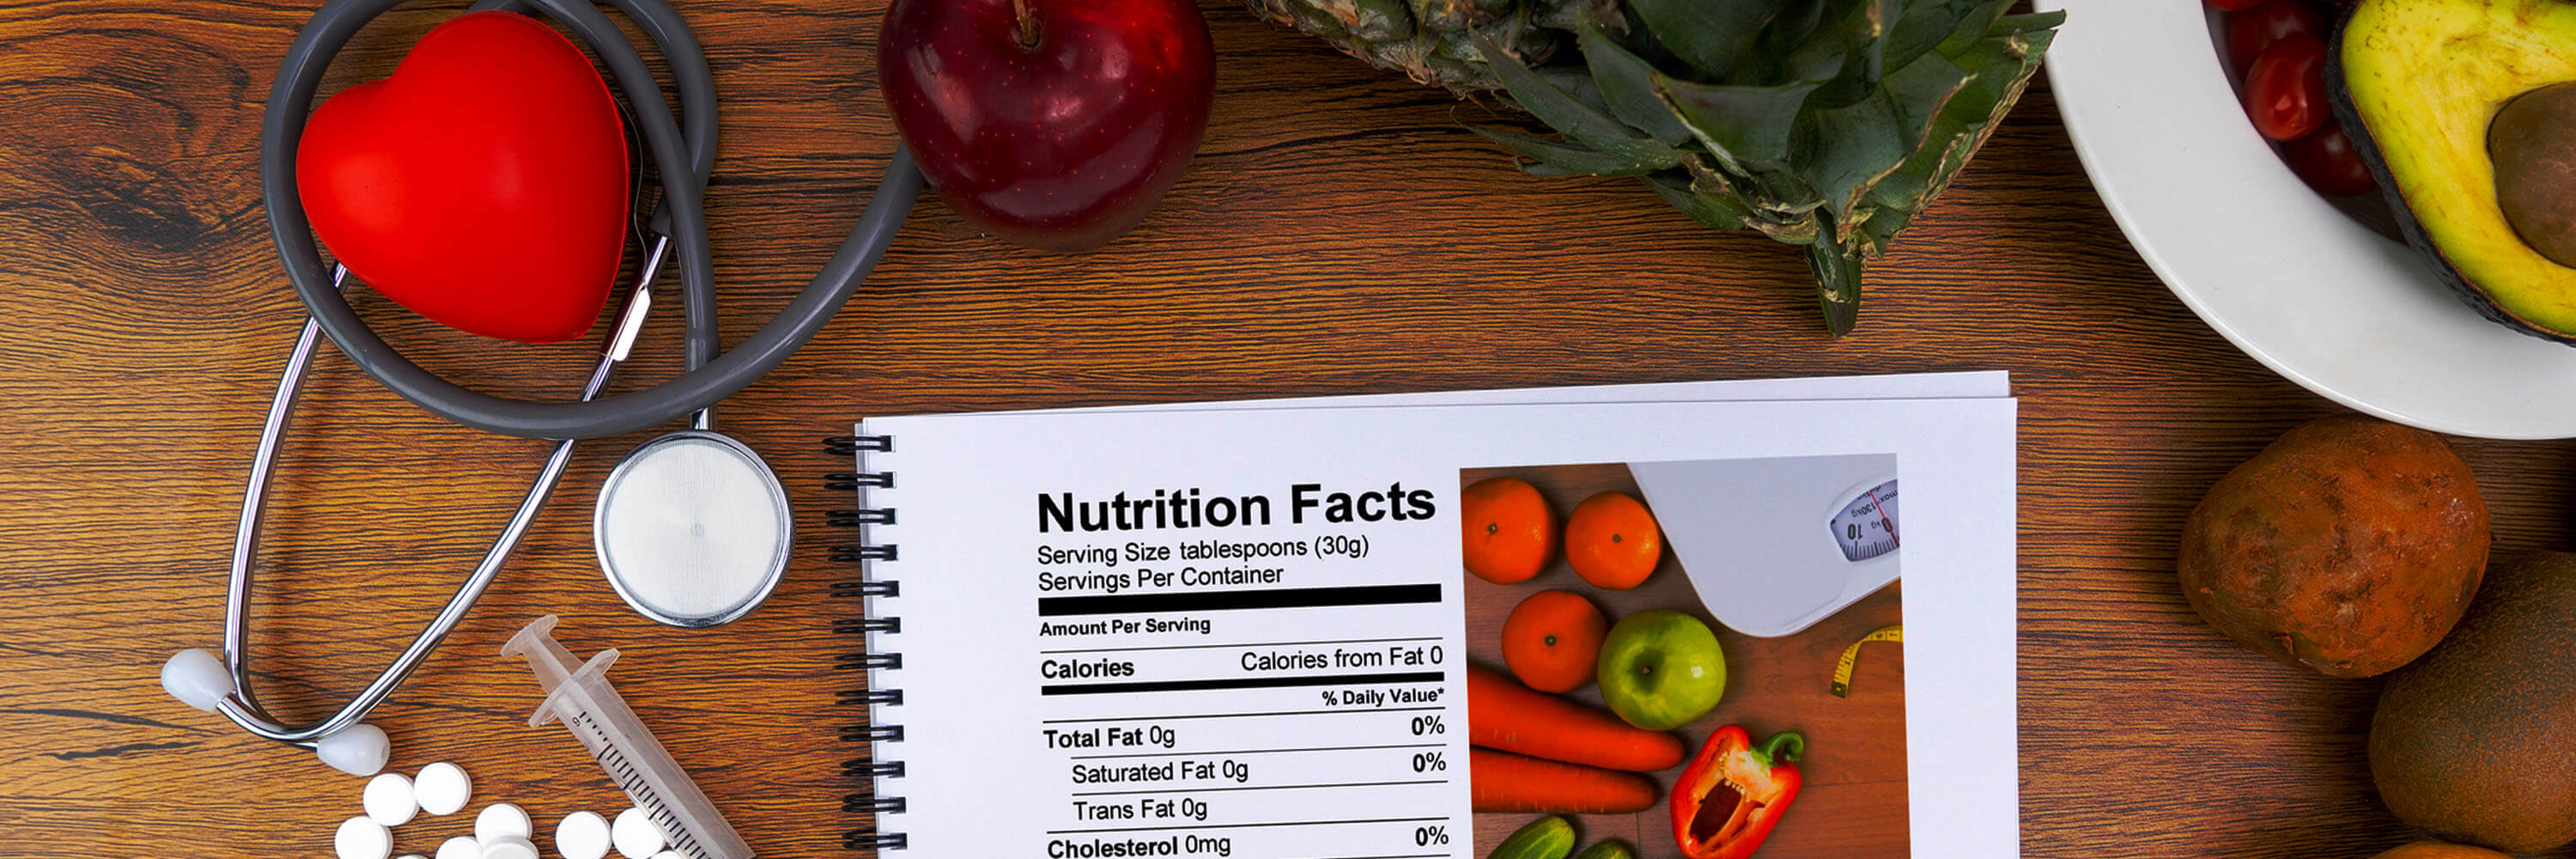 nutrition facts next to array of fruit and vegetables